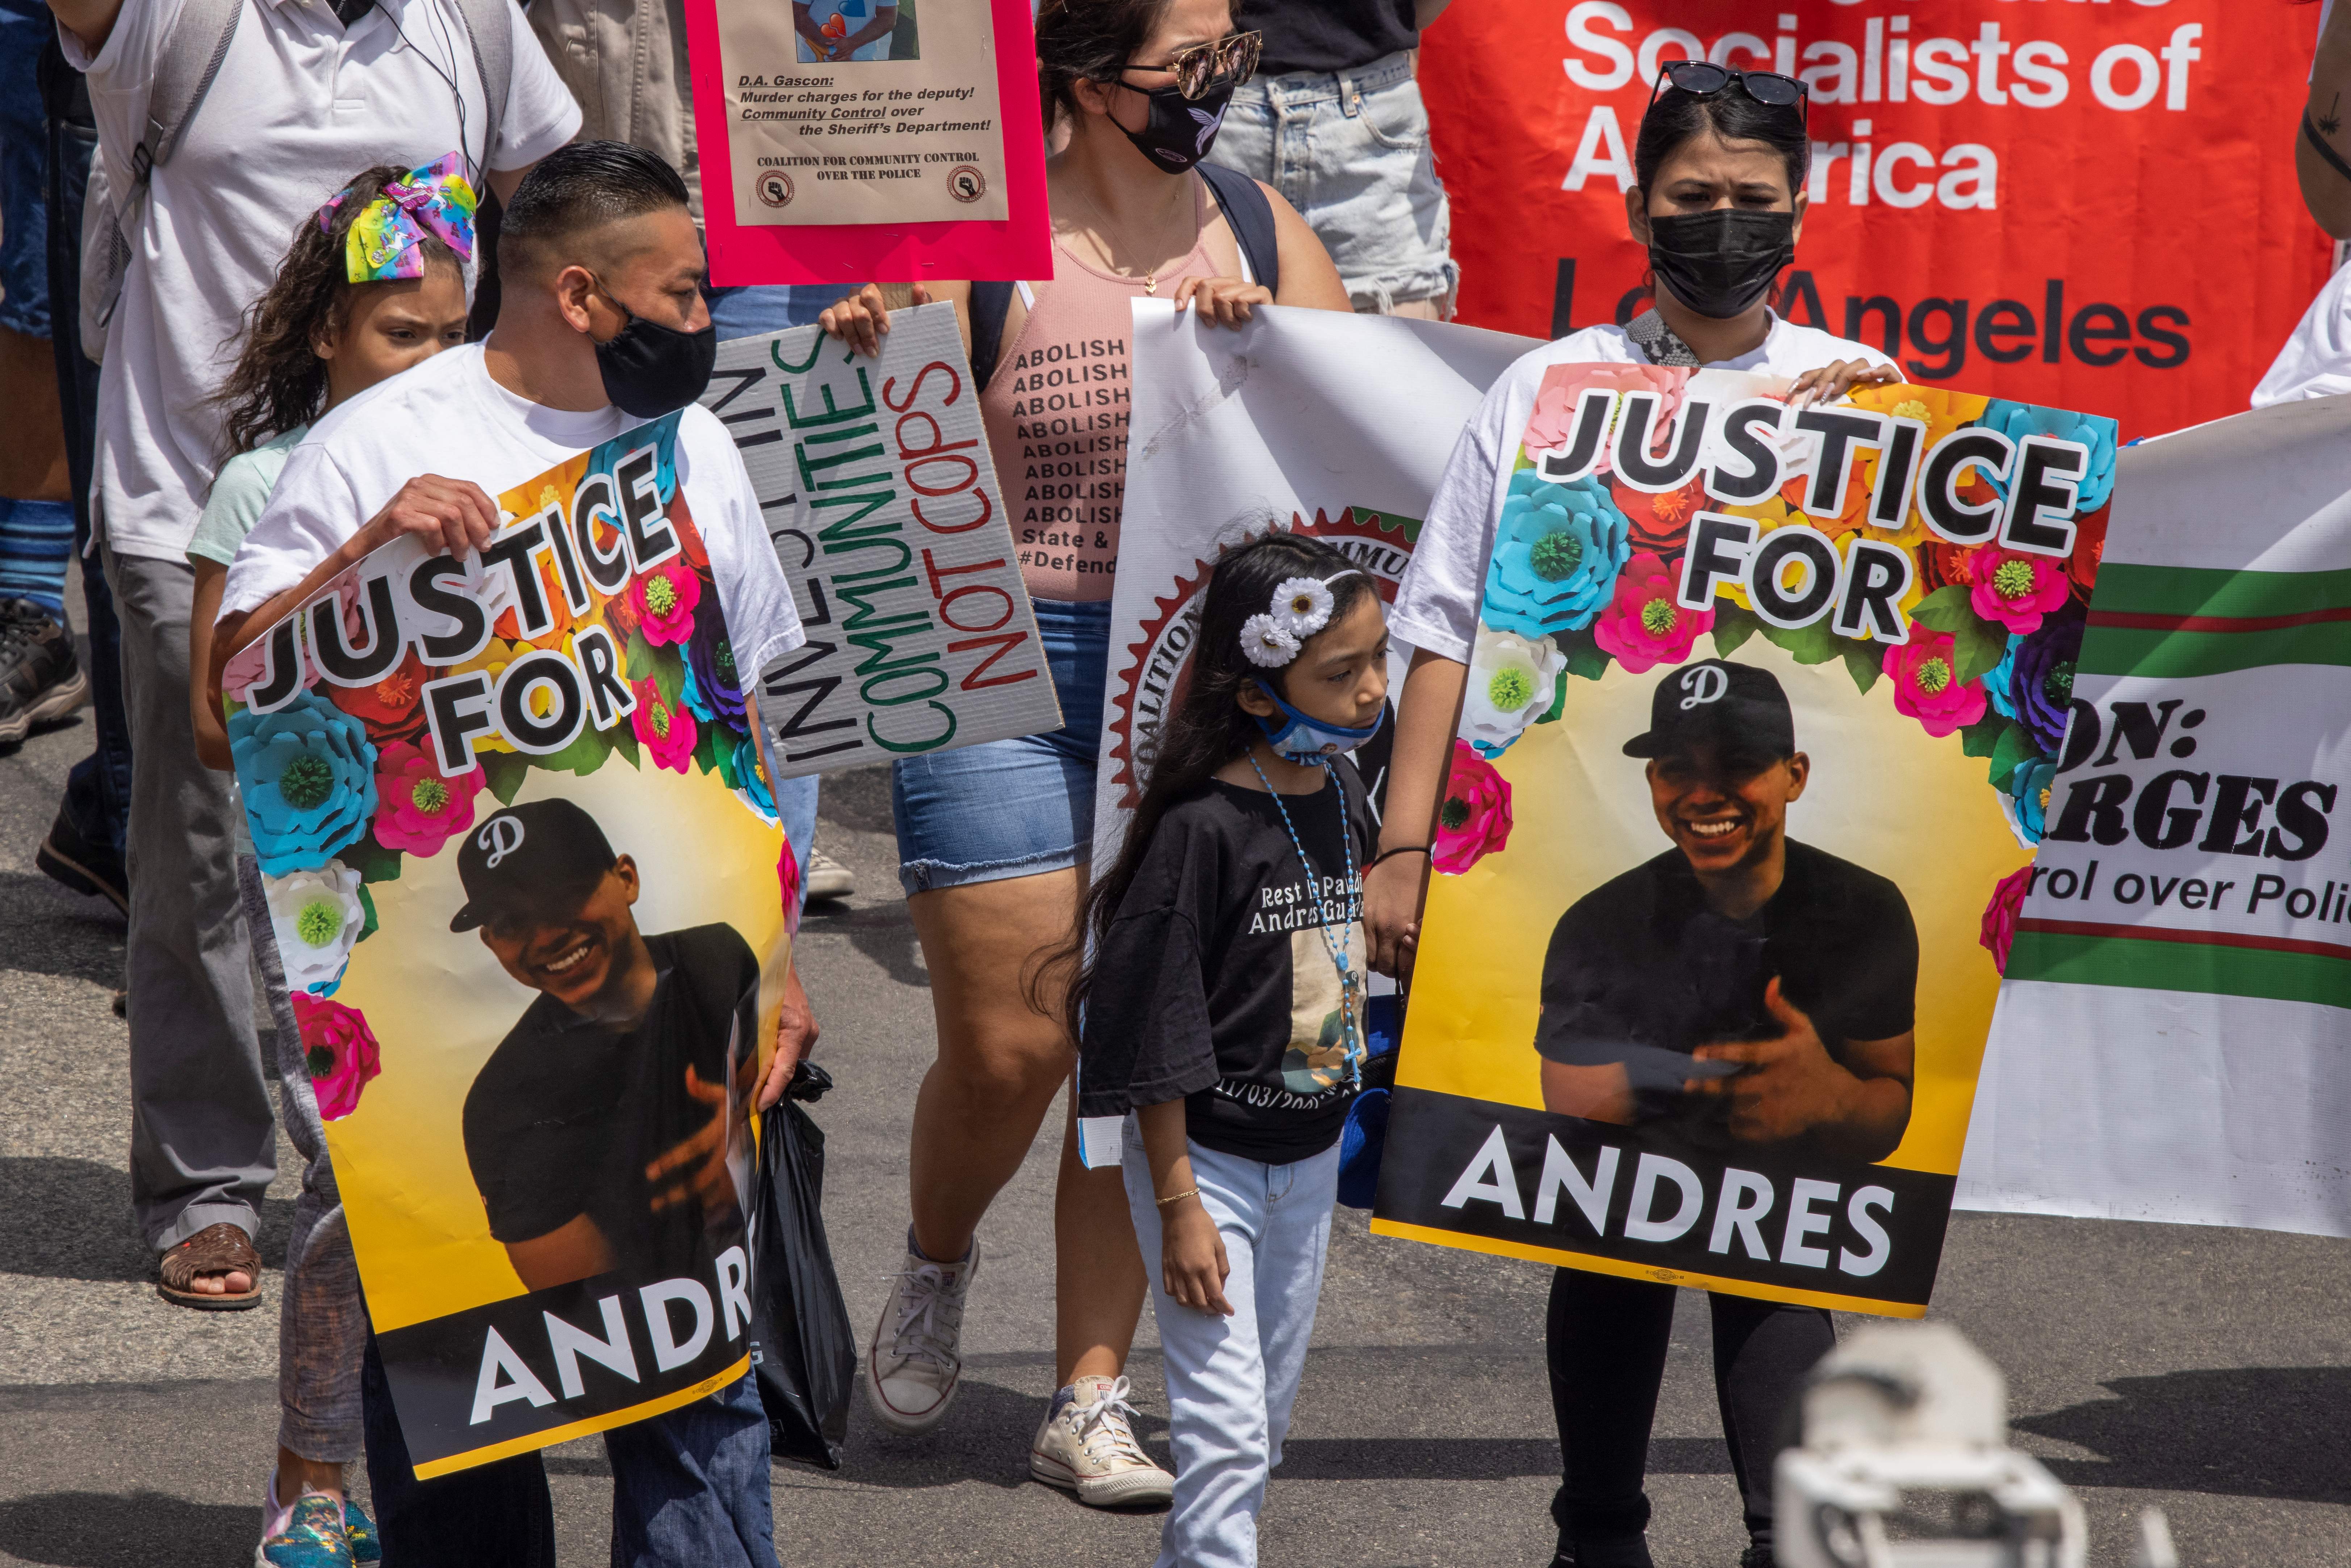 Protesters gathered after police shot and killed 18-year-old Andres Guardado in the back